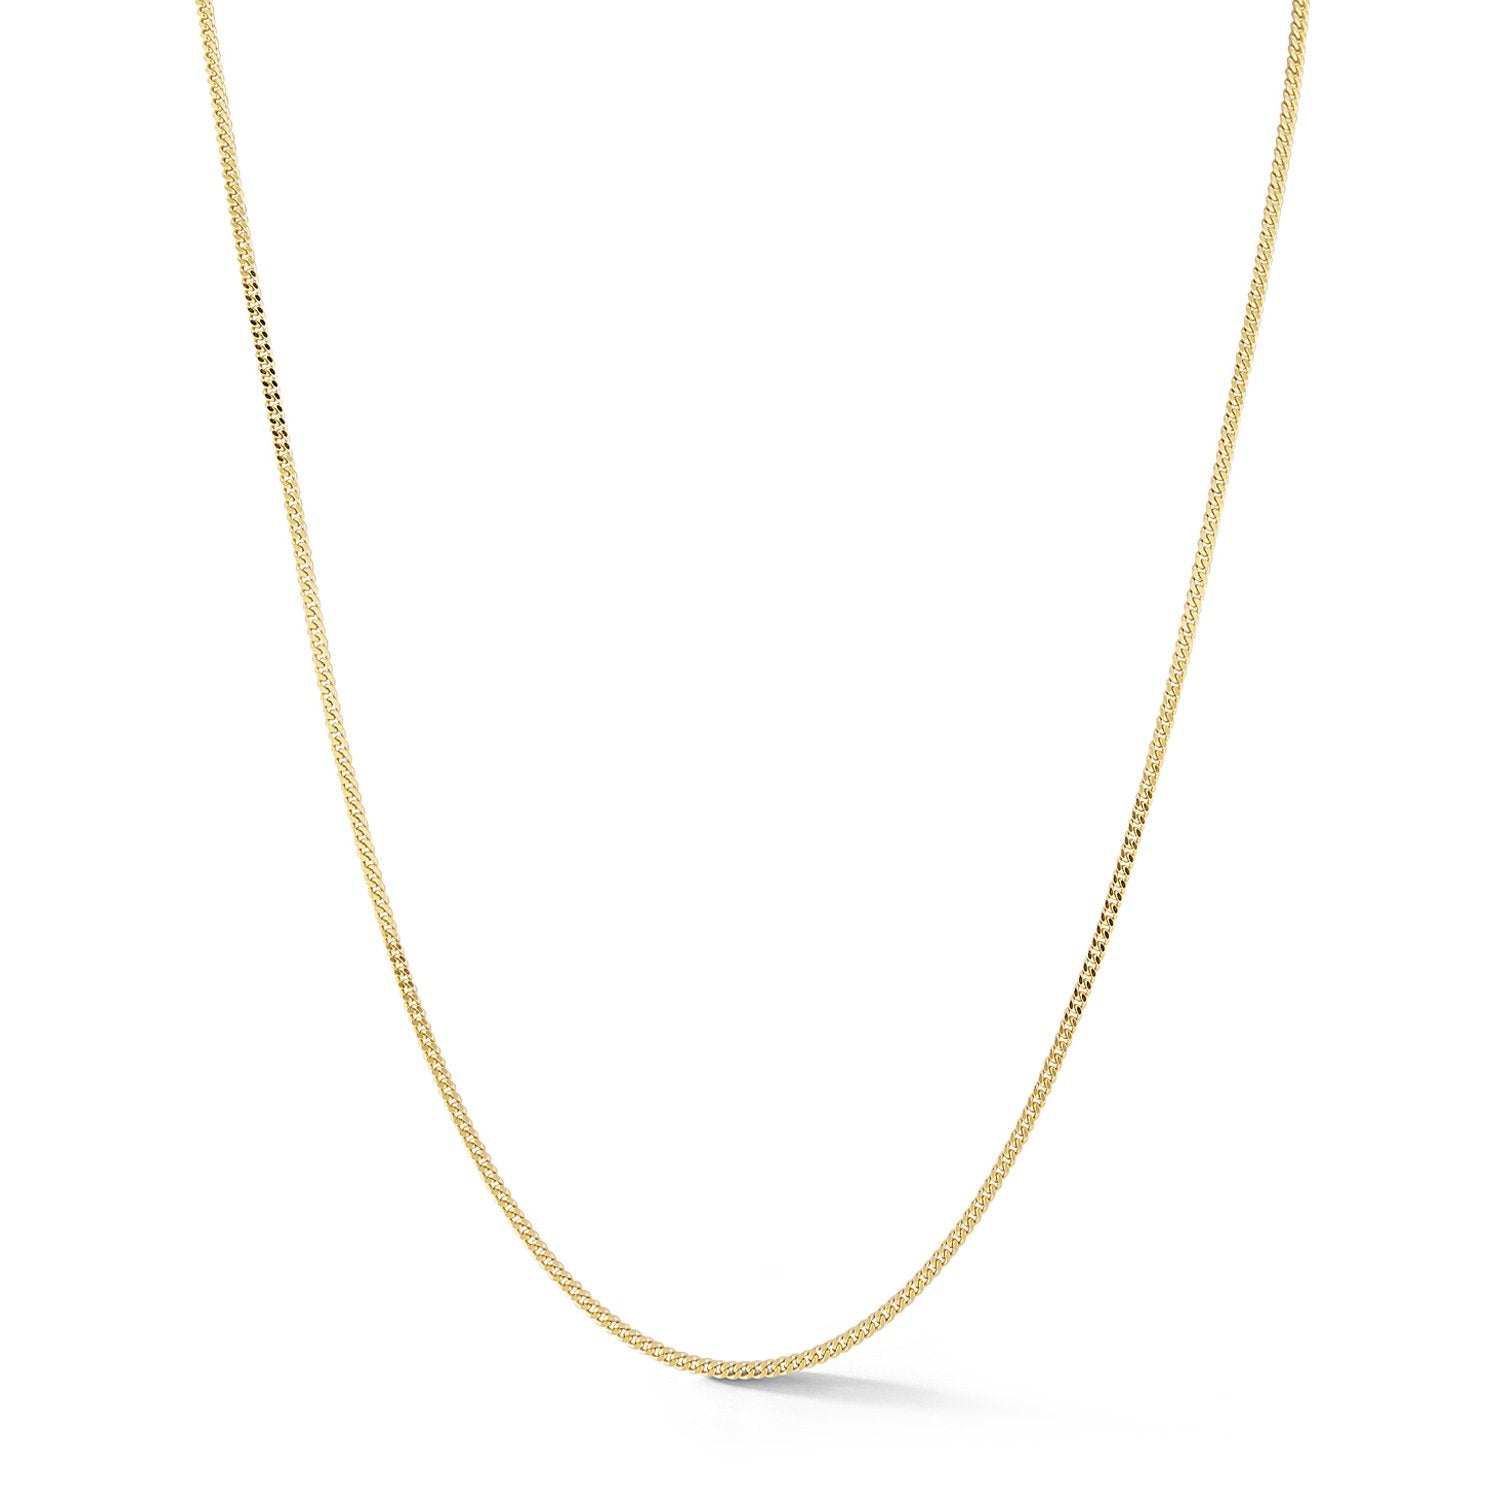 Yellow Gold & Diamond Satin Finish Curb Chain Link Necklace